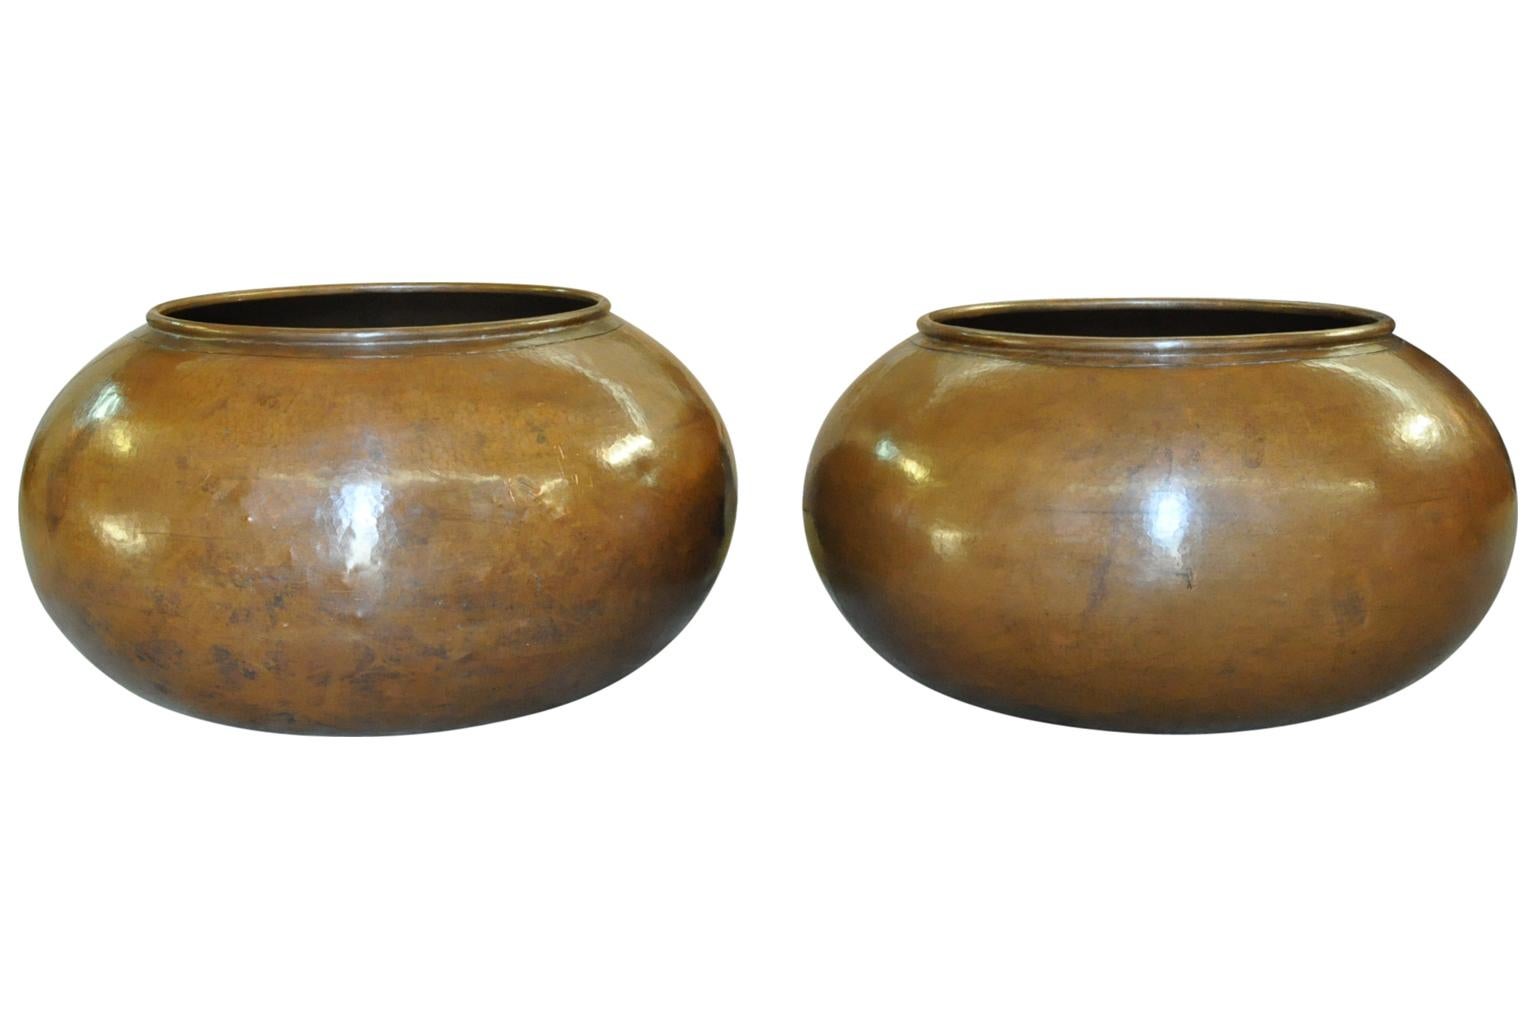 A sensational very large early 20th century pair of copper pots, jardinière, from Northern Italy. Wonderful interior or exterior elements. The sizes vary slightly. The larger pot measures: 21 1/4